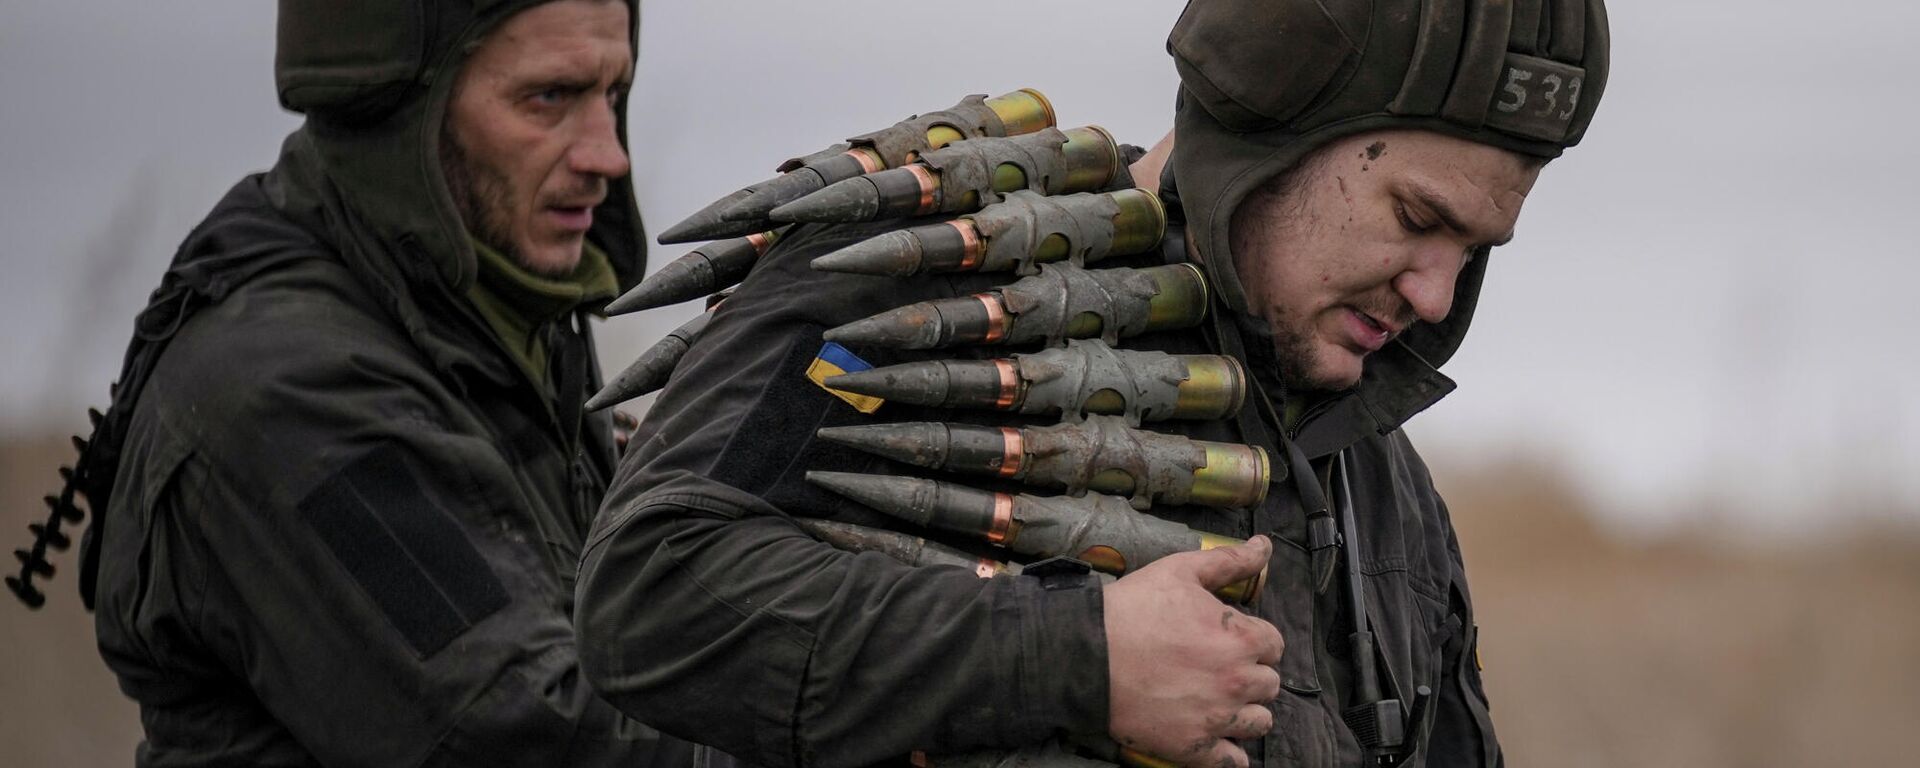 A Ukrainian serviceman carries large caliber ammunitions for armored fighting vehicles mounted weapons during an exercise in a Joint Forces Operation controlled area in the Donetsk region, eastern Ukraine, Feb. 10, 2022. - Sputnik International, 1920, 09.04.2022